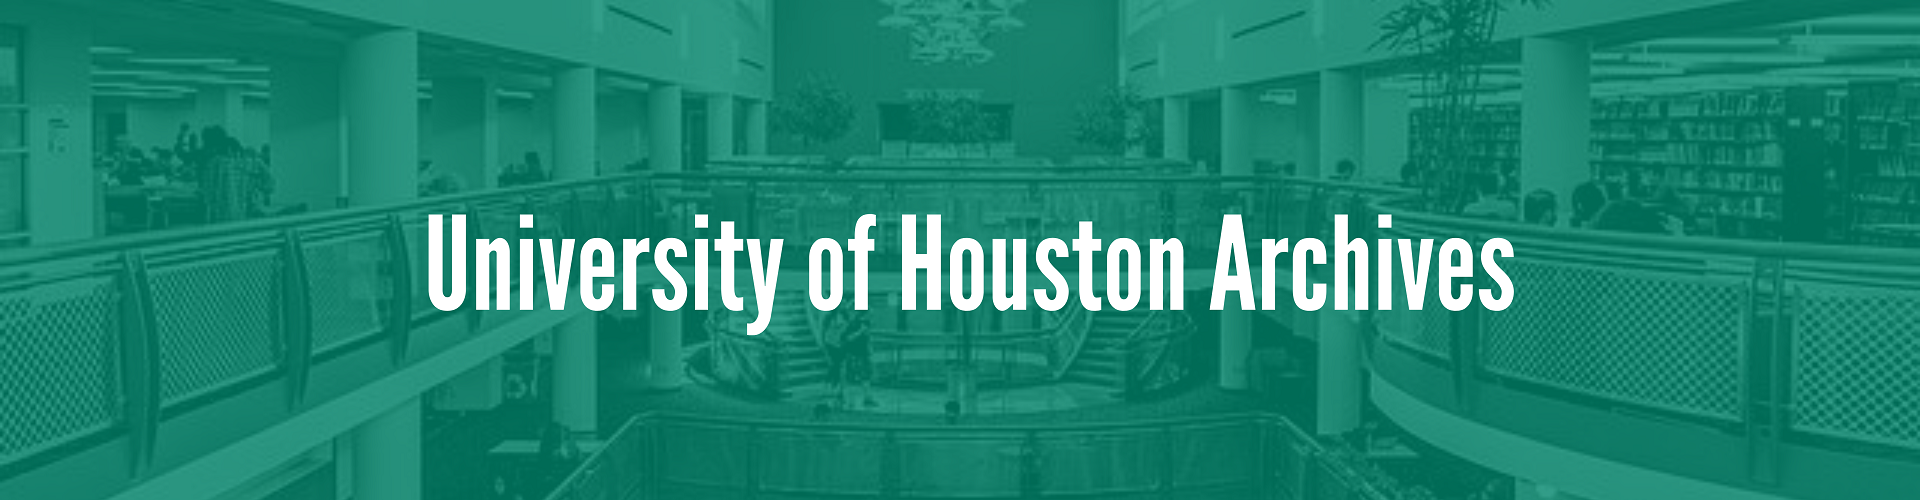 univ-of-houston-archives-1.png